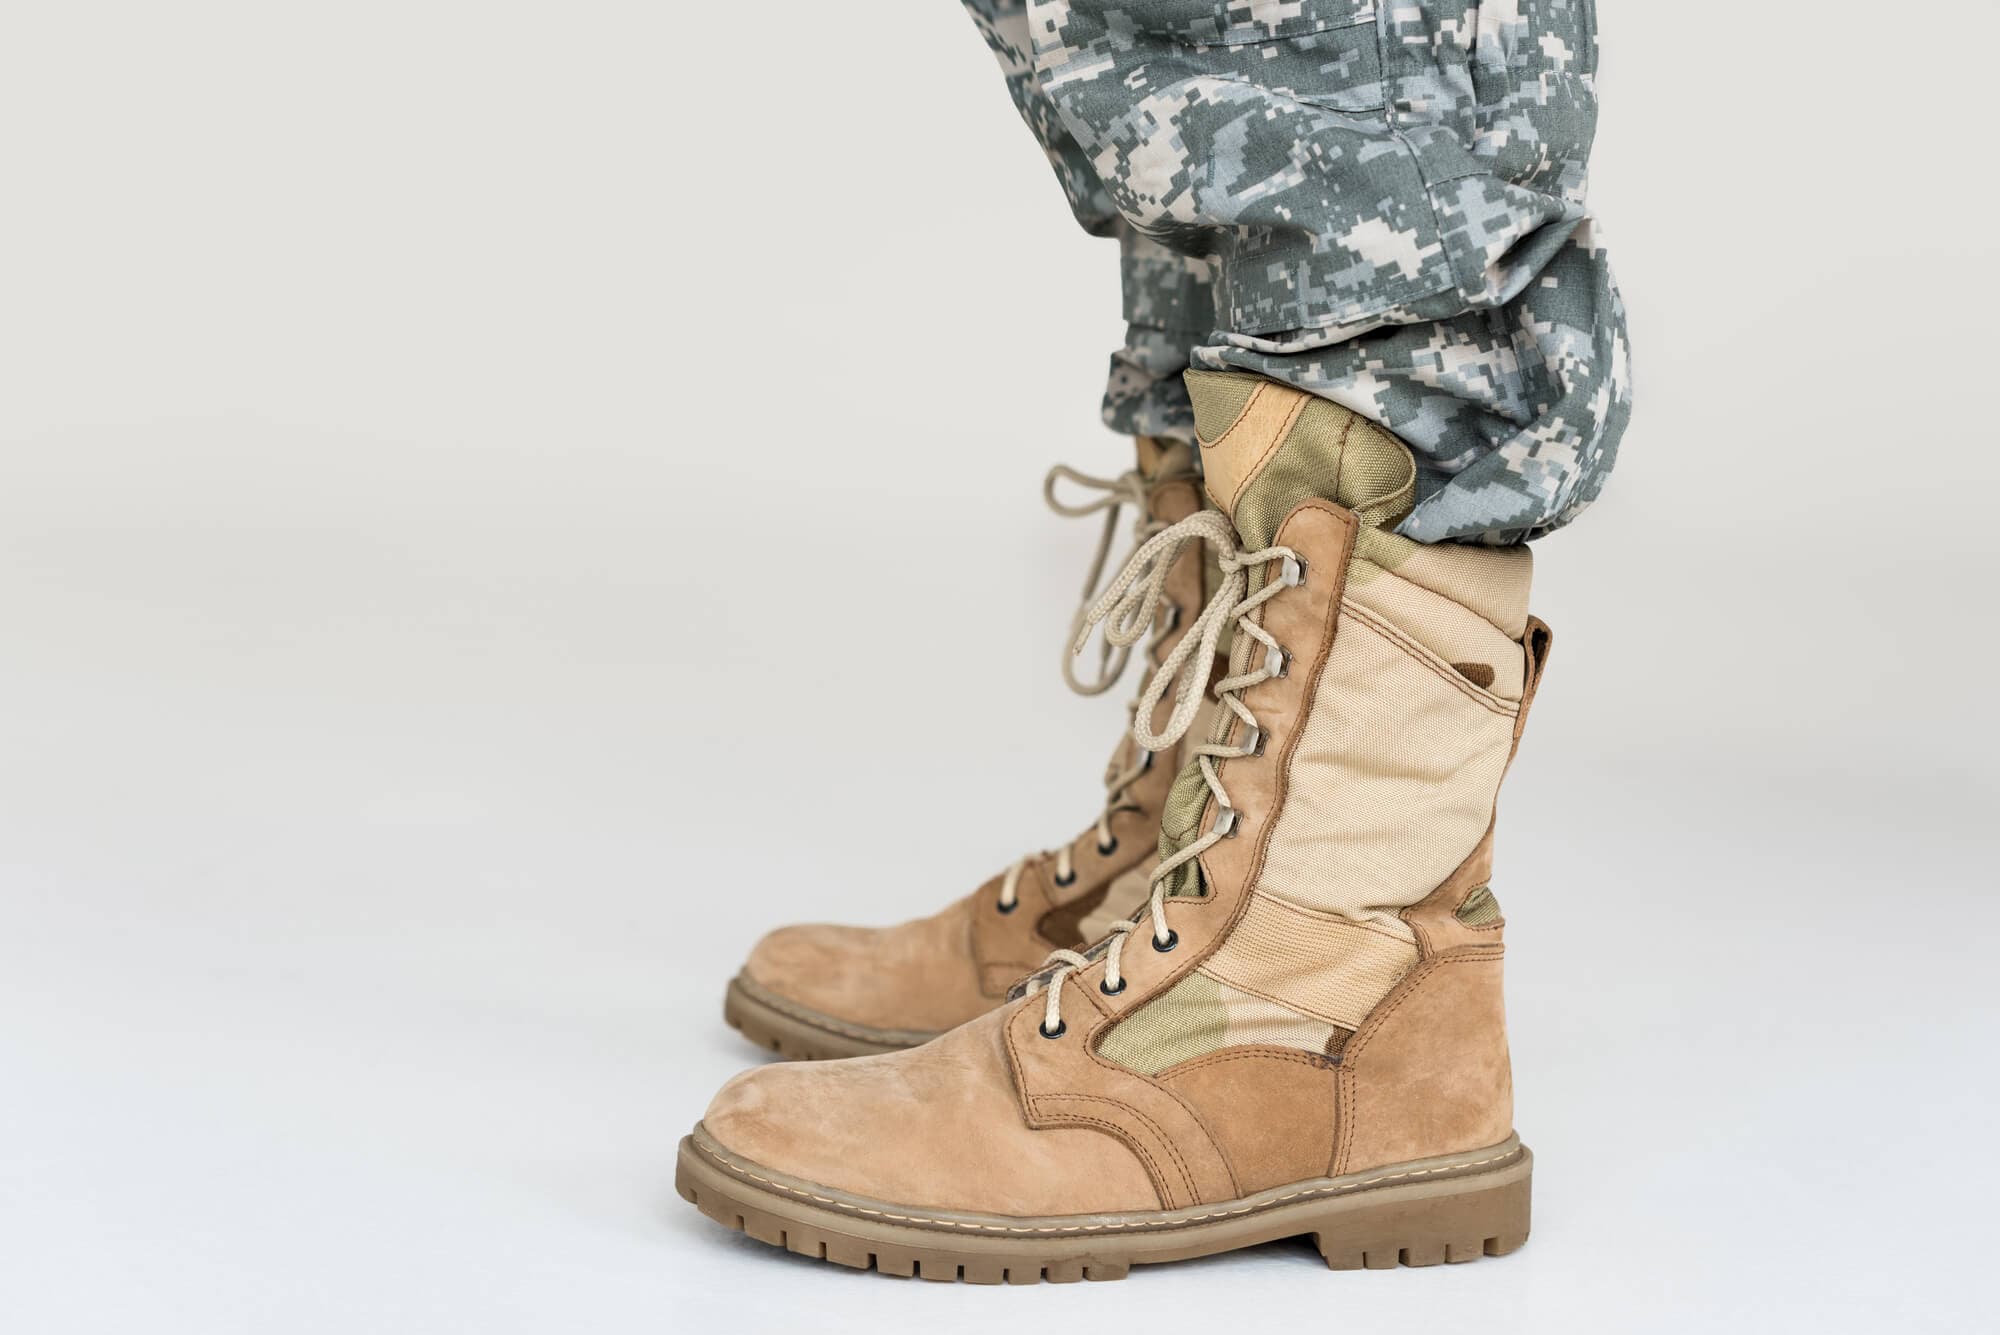 Best Army Boots